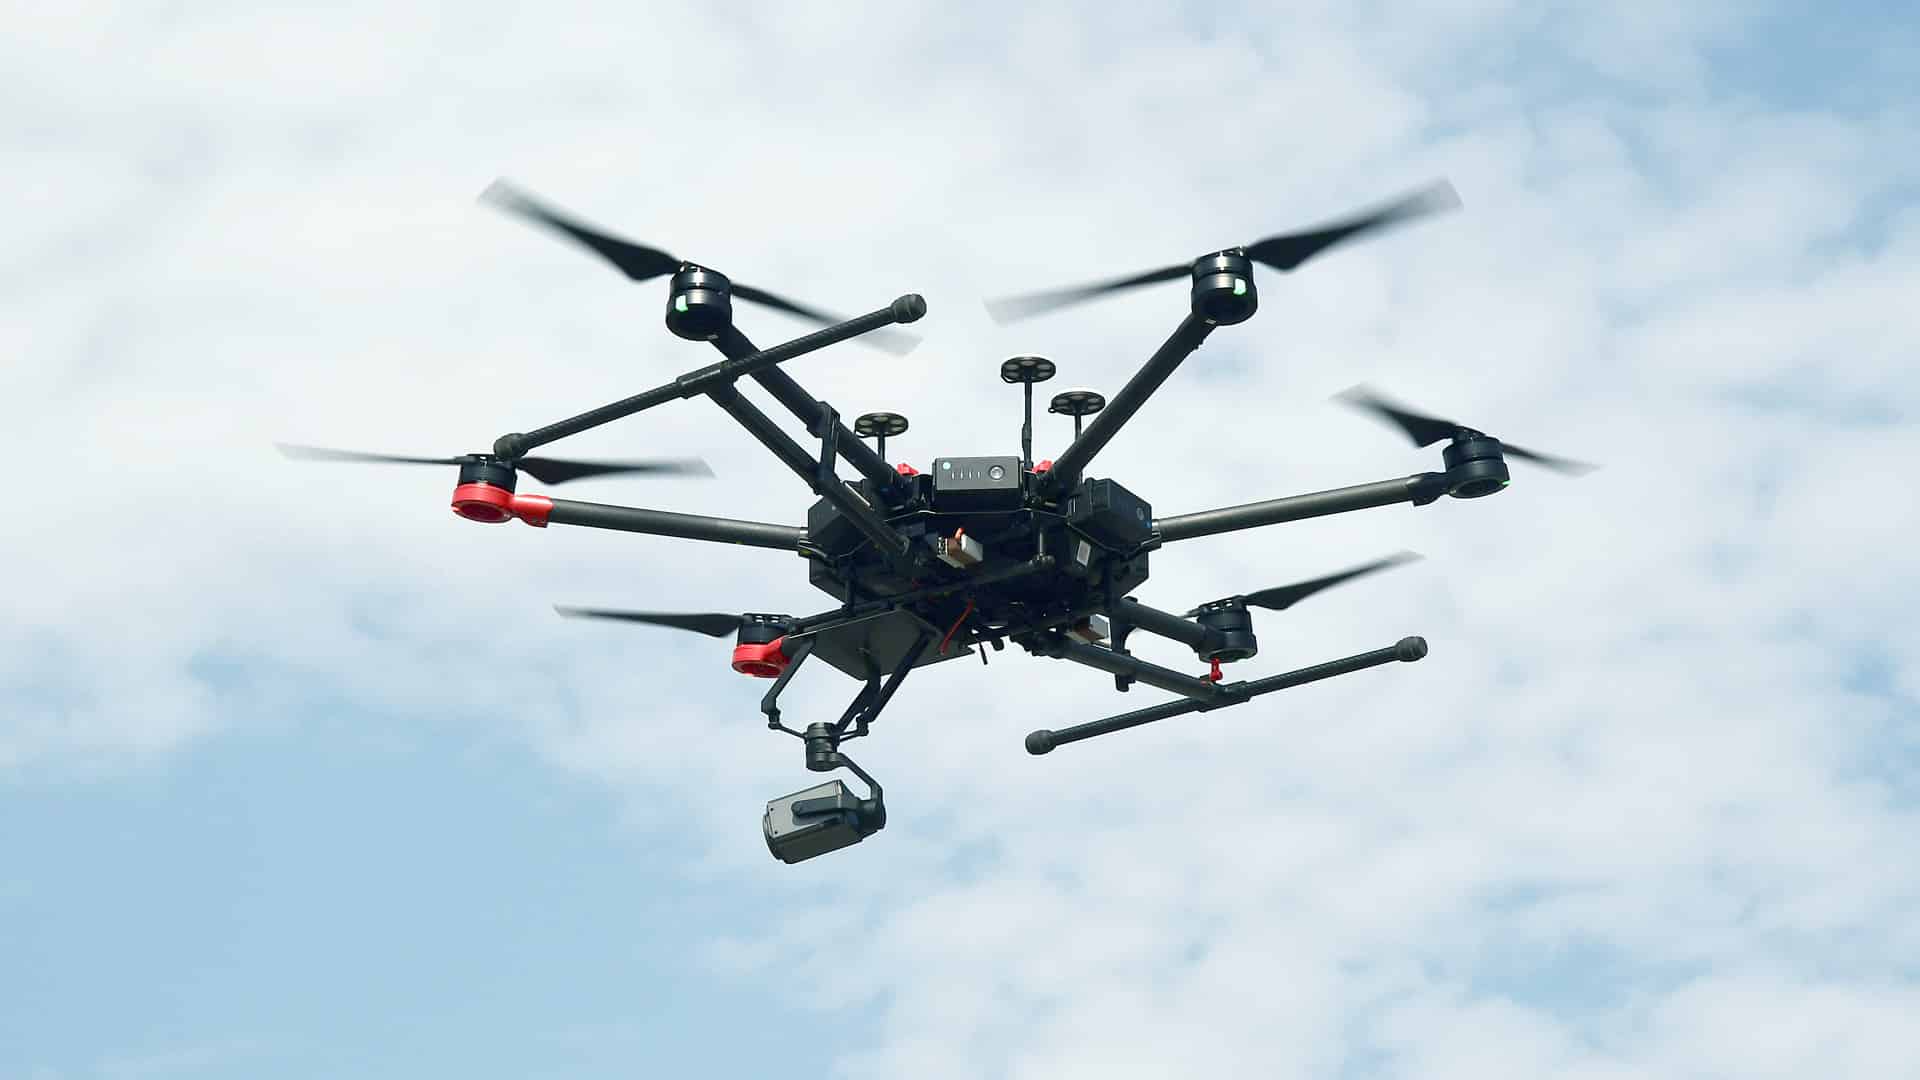 Omega group firm looks to enter drone mkt with Rs 75 cr investment